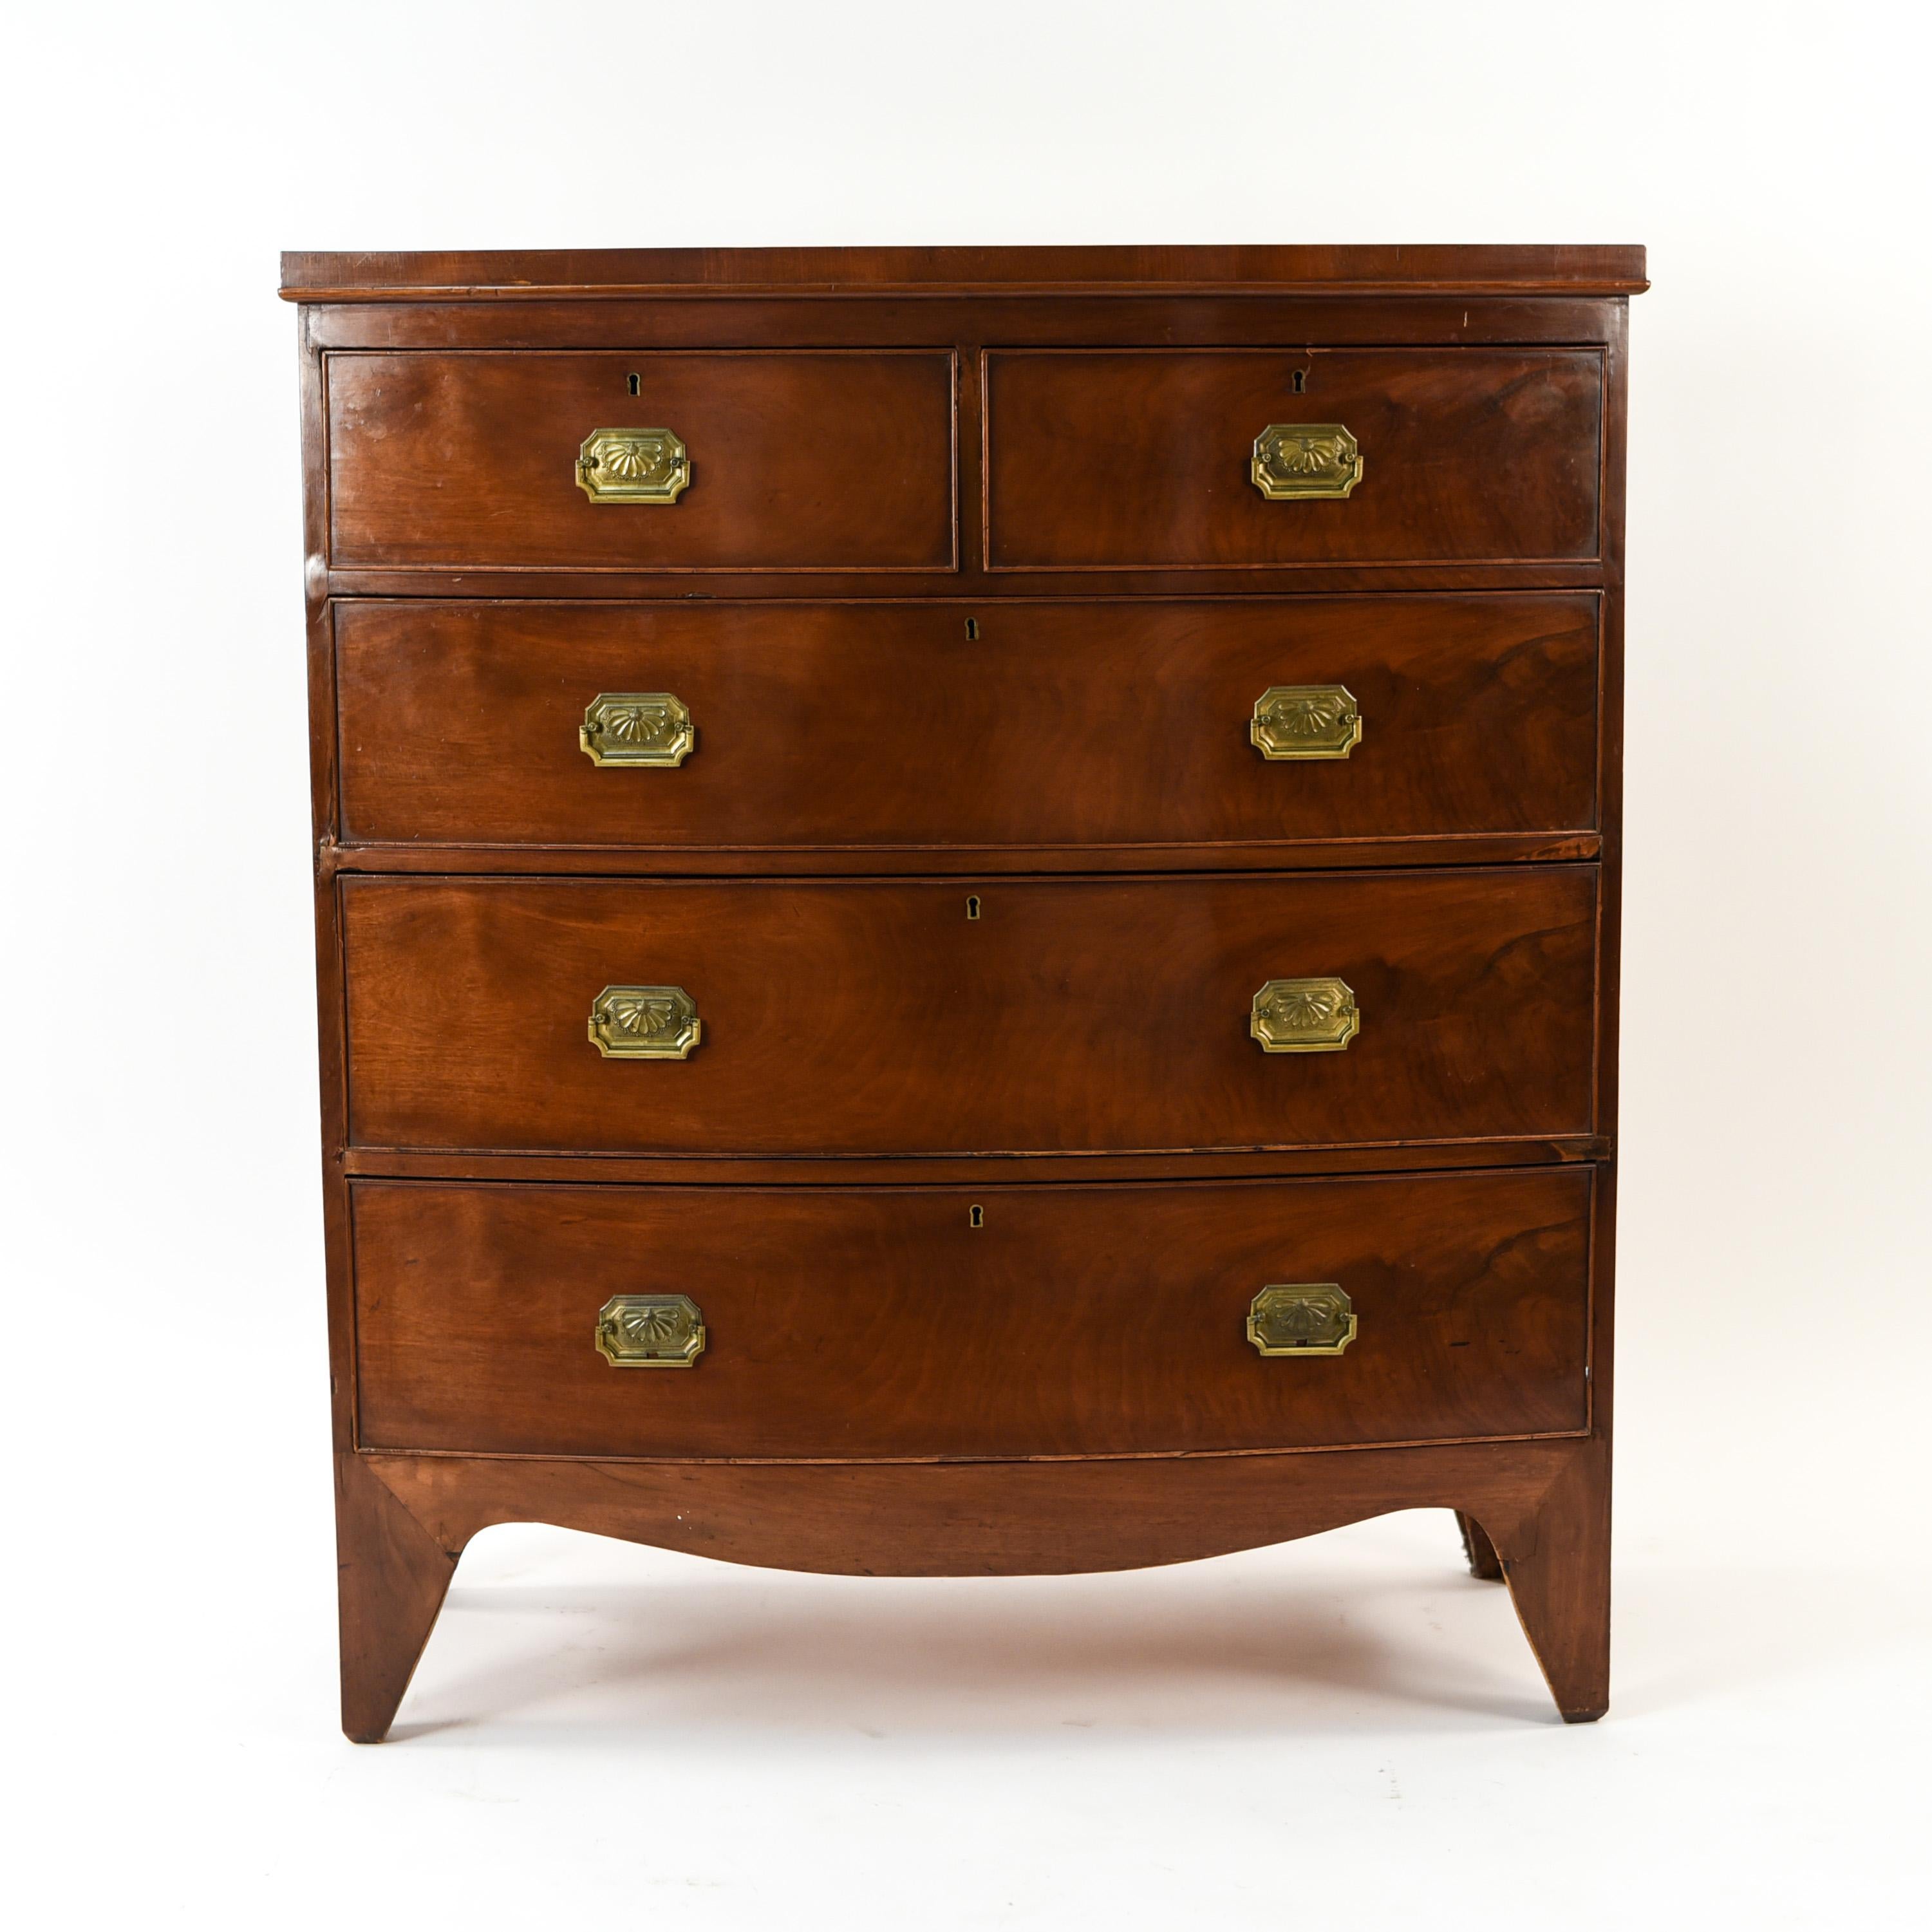 This 19th century English Regency period chest of drawers features five drawers in a two-over-three drawer bow front design and is crafted of quality mahogany wood. This handsome antique chest has traditional hardware and an attractive, pleasing